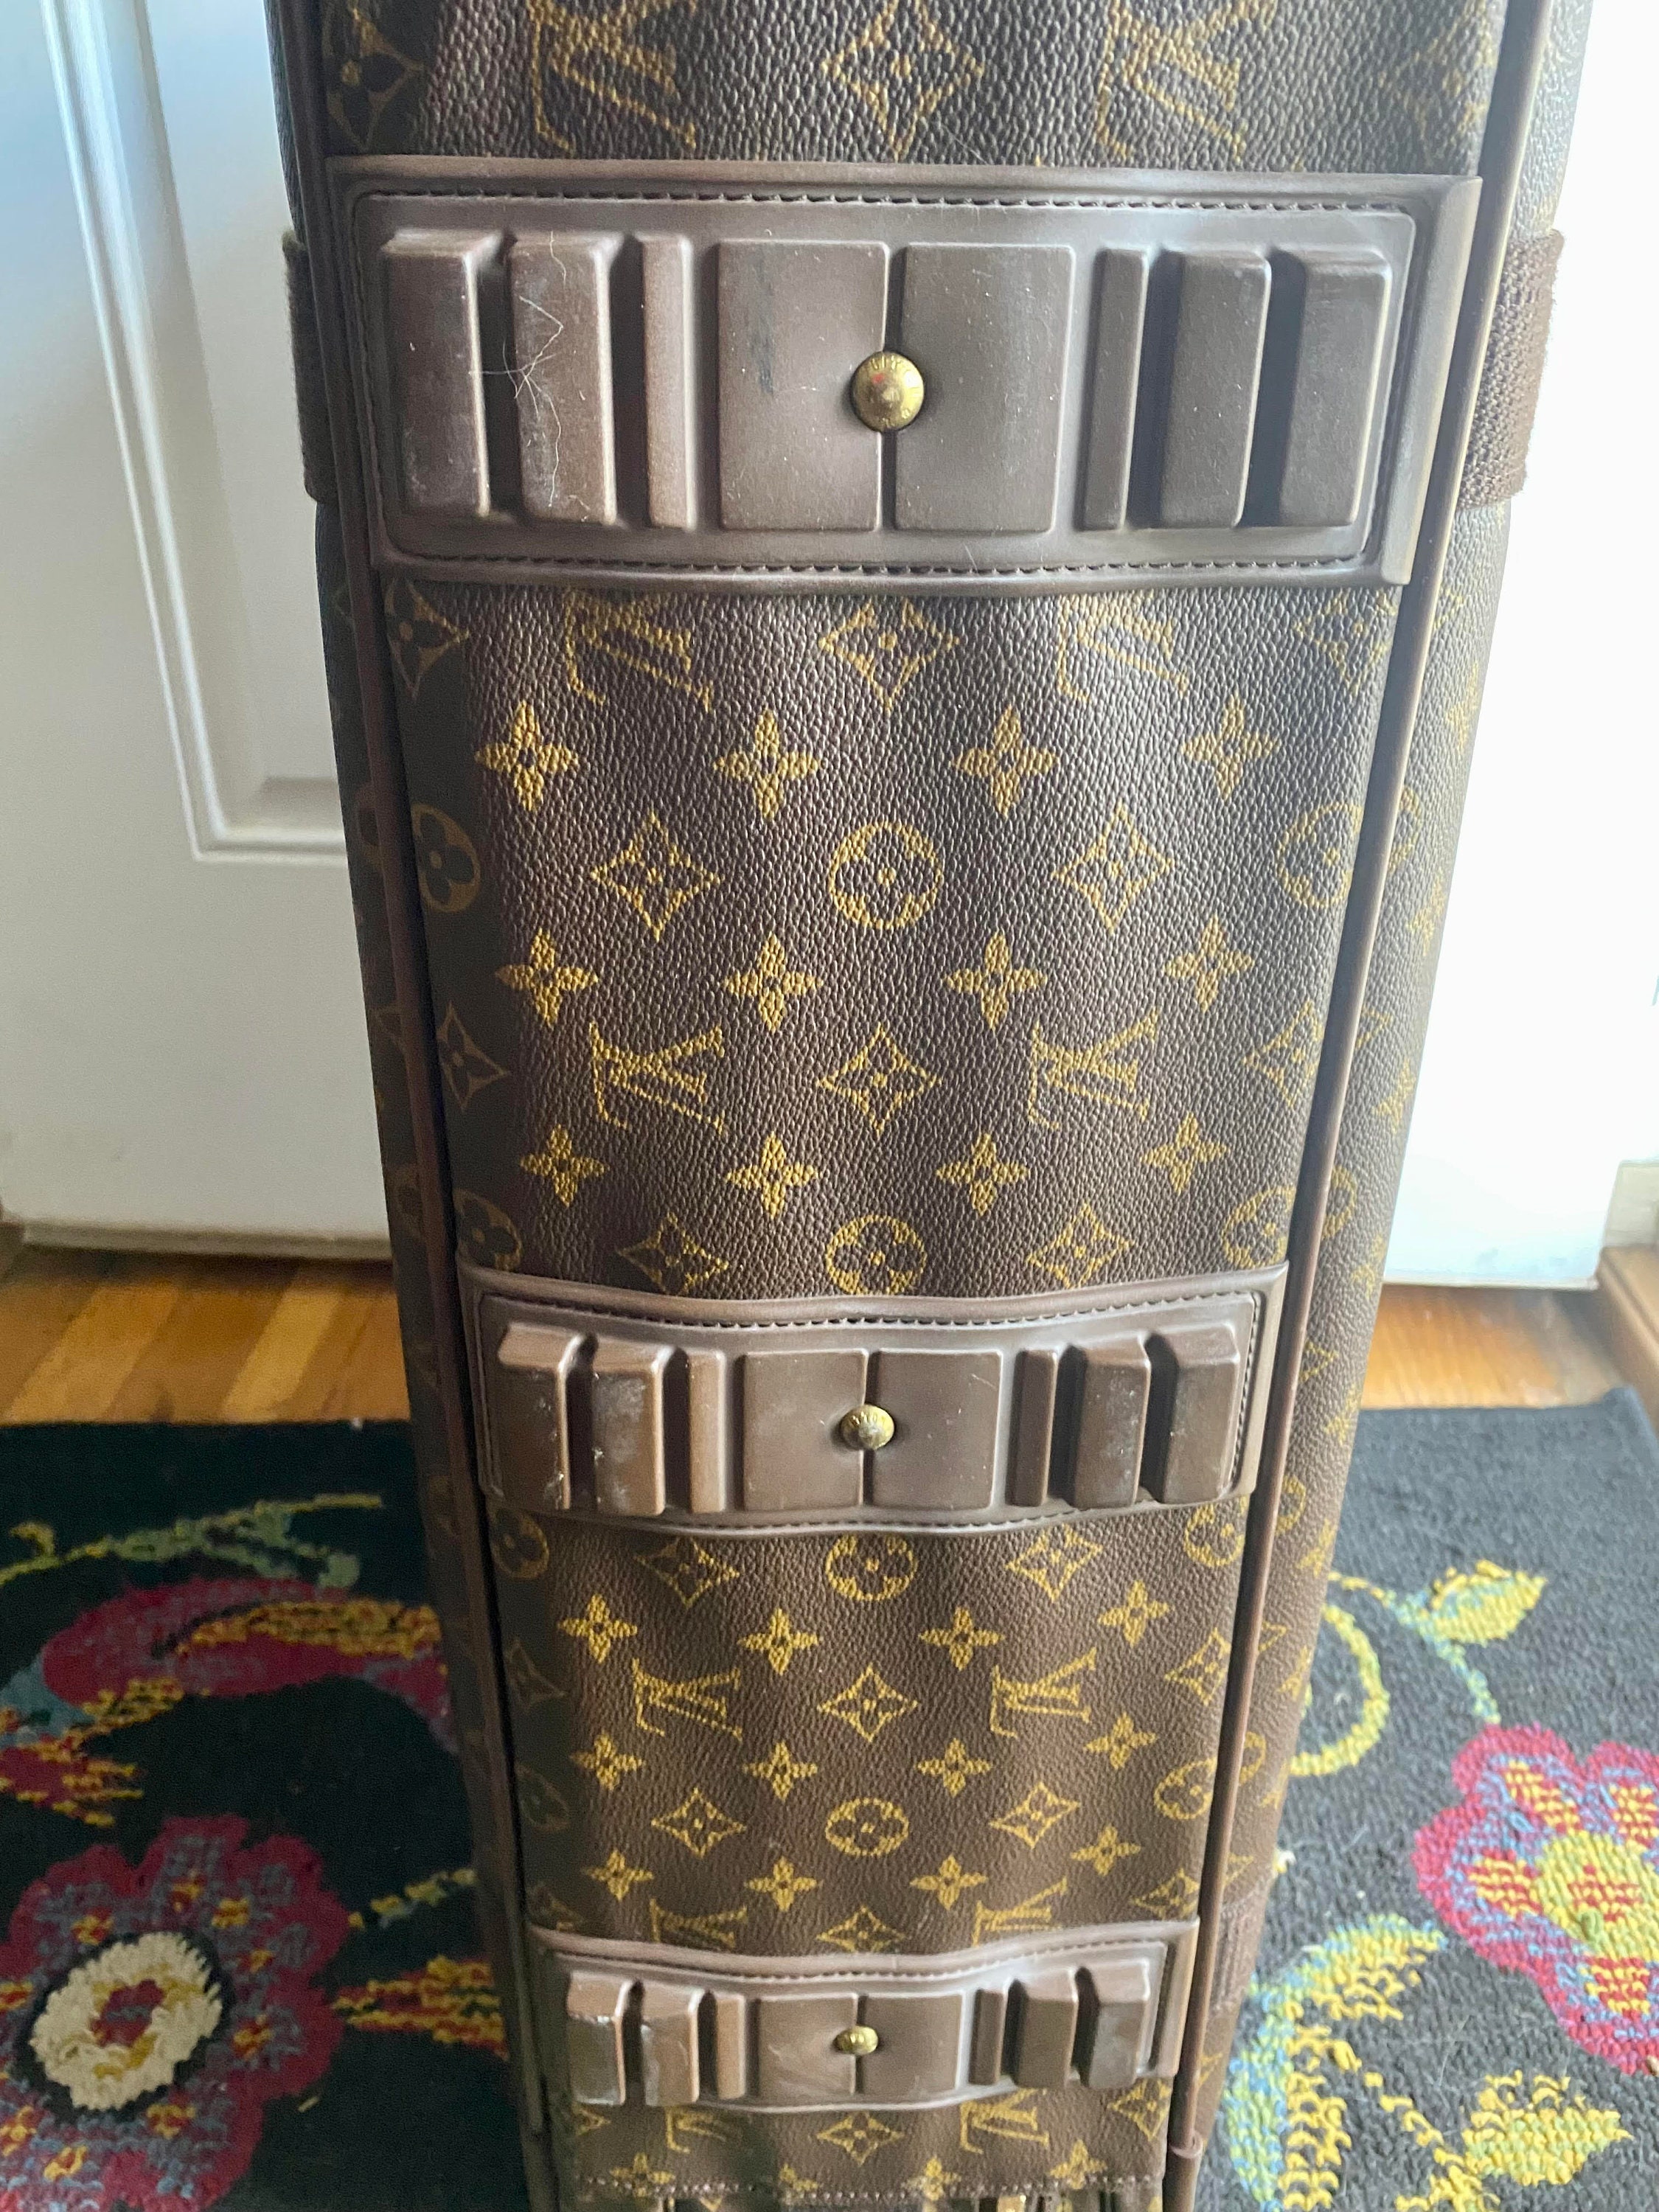 Just finished cleaning and conditioning my “new” vintage travel bag : r/ Louisvuitton